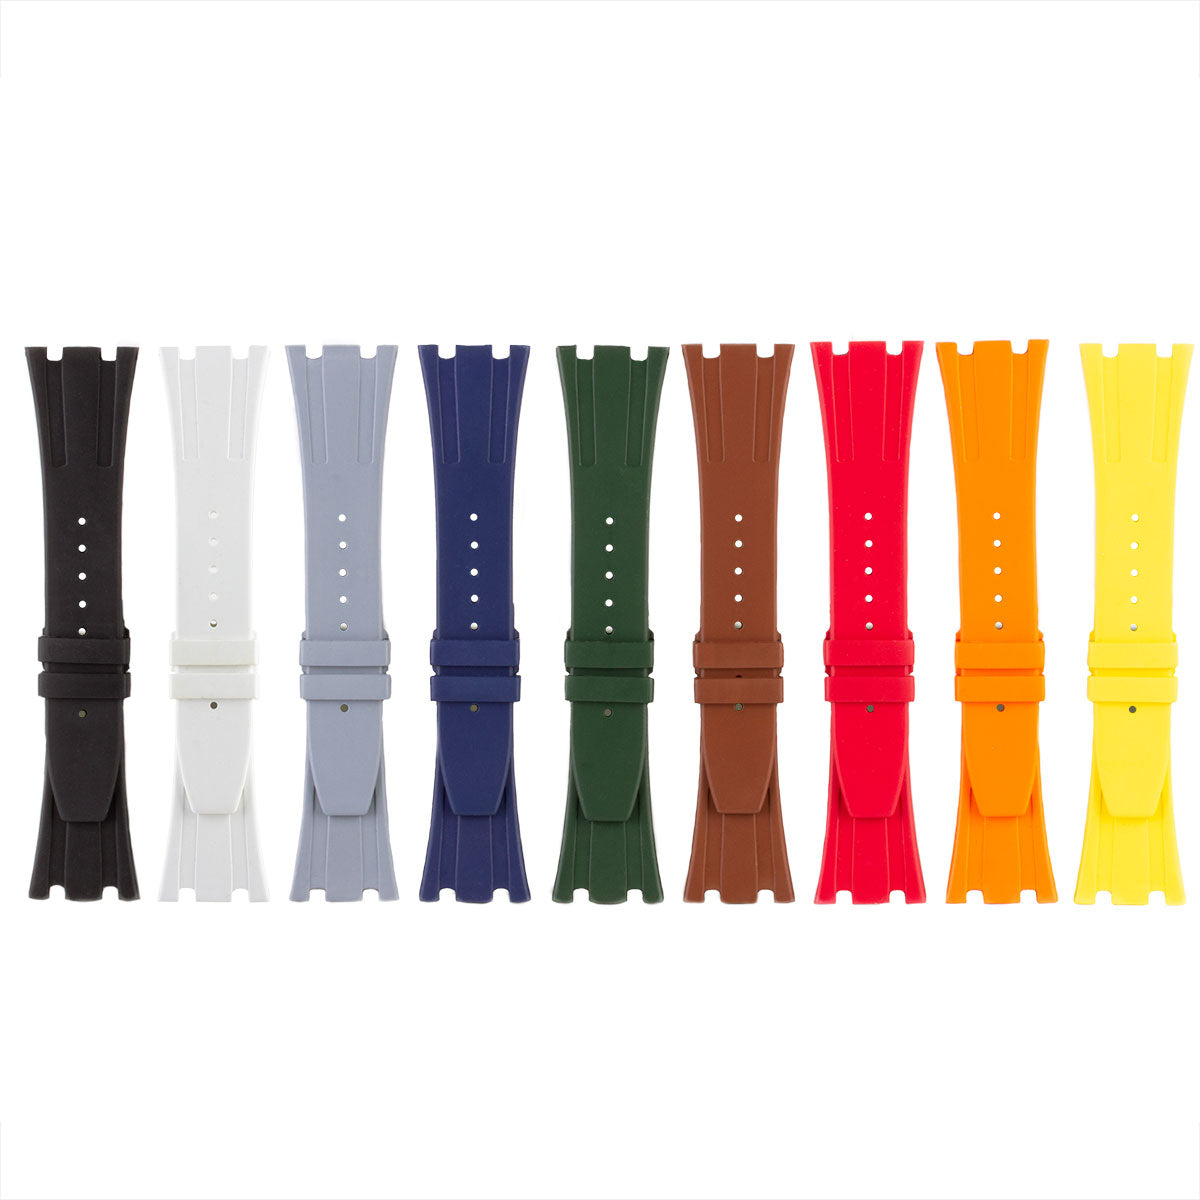 Audemars Piguet Royal Oak 39 and 41mm - Rubber integrated watch band (black, brown, grey, blue, green, red, orange, yellow)